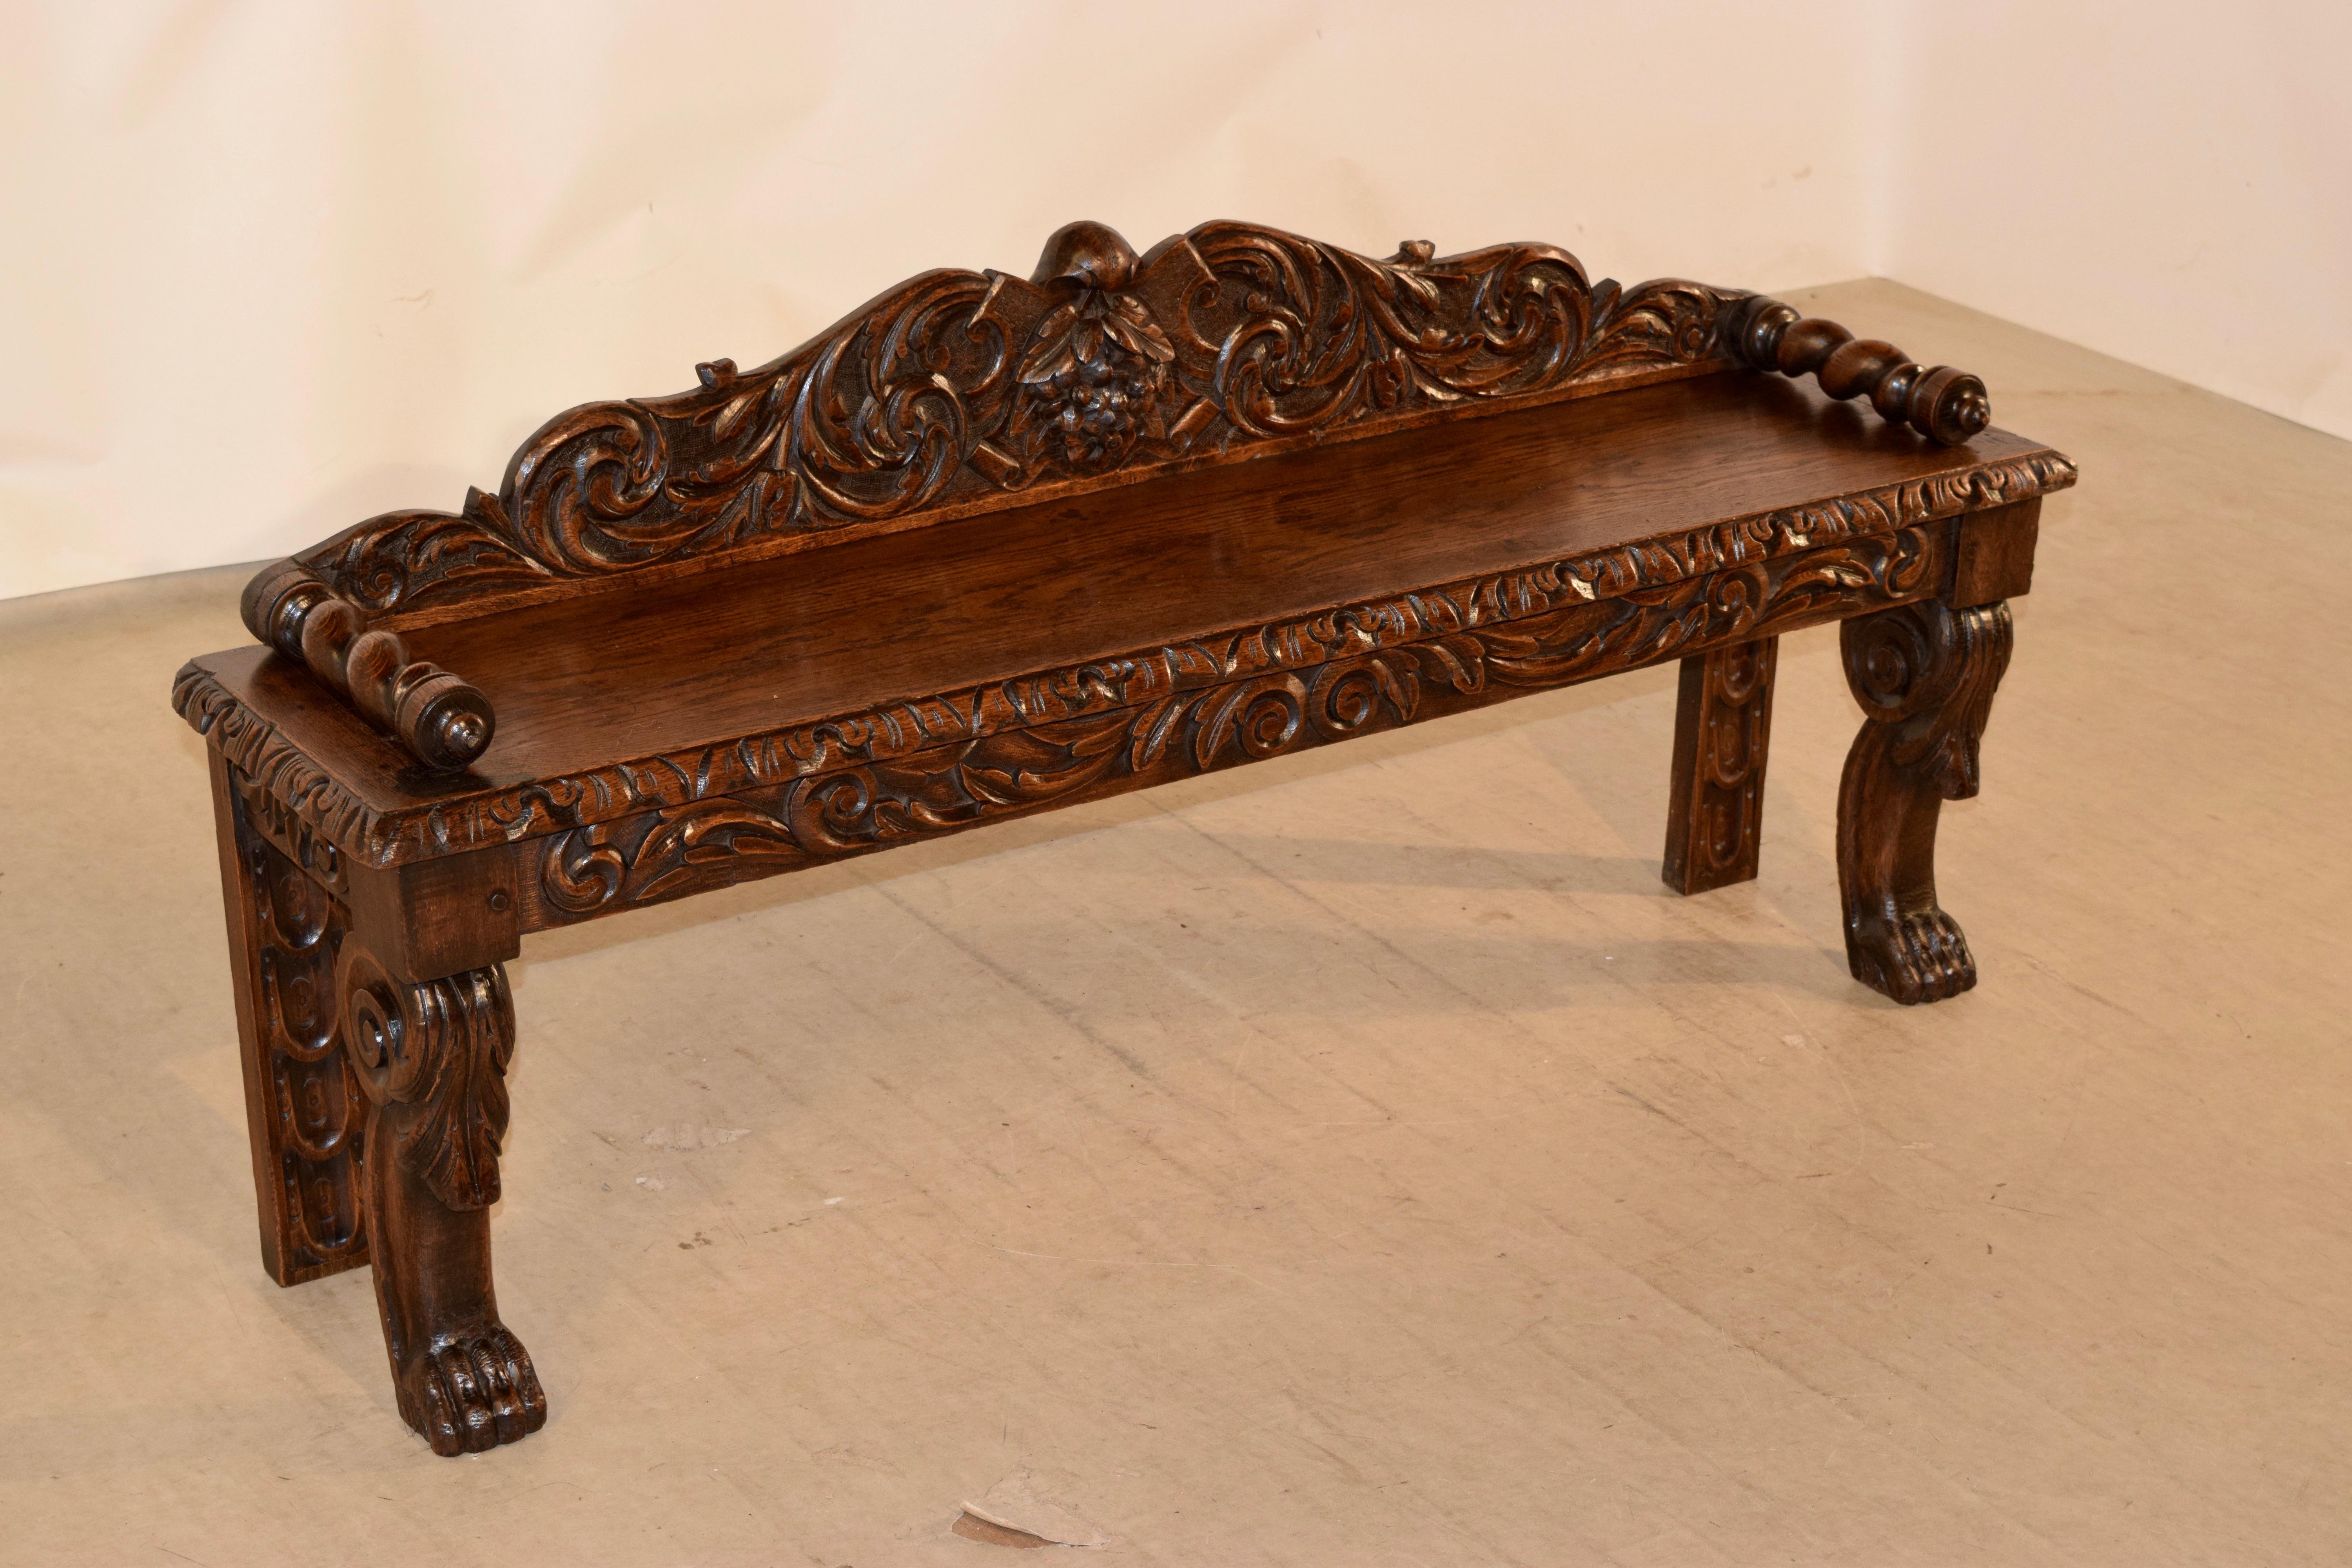 19th century oak window seat from France. The back is scalloped and hand carved decorated with lovely decorations of leaves and grapes, following down to hand-turned barley twist arms over the seat with a beveled and decorated edge on the front and